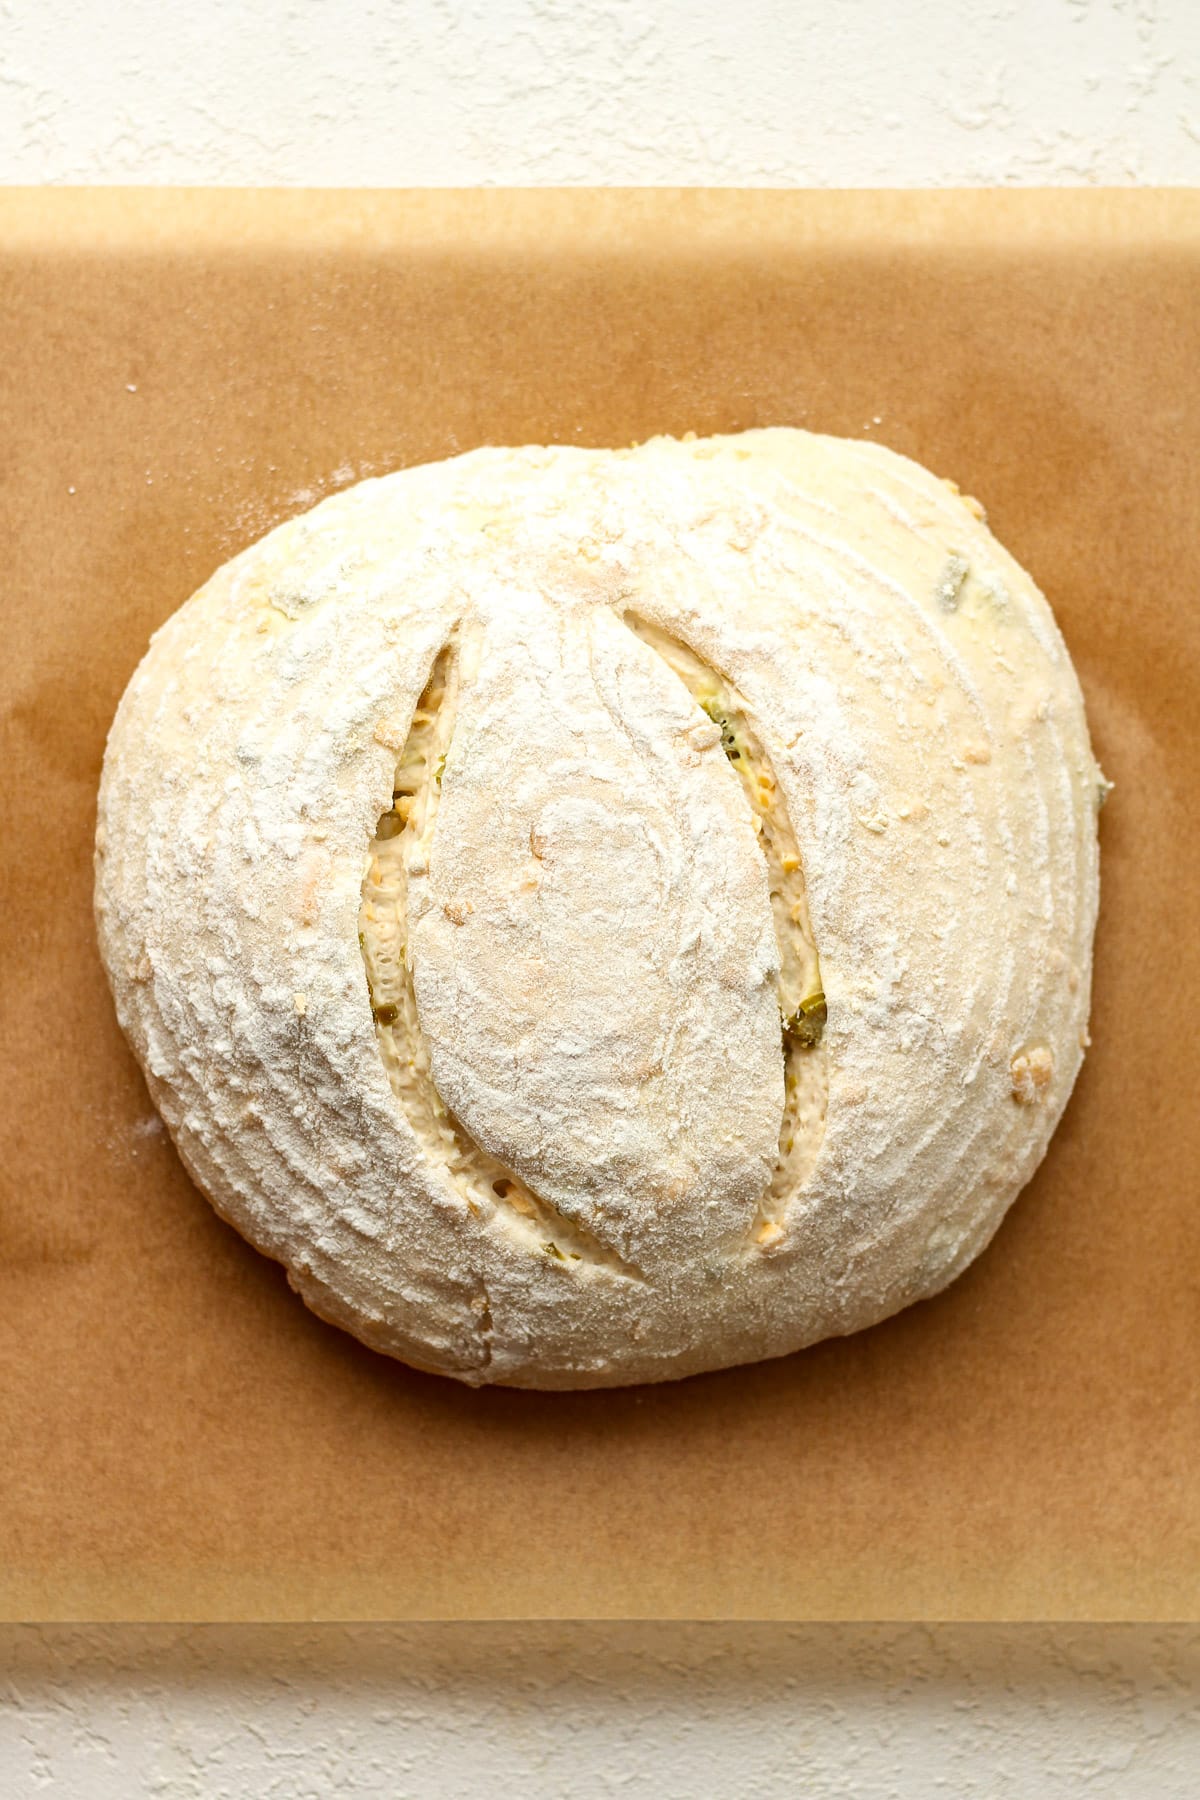 The dough with slashes on the top.